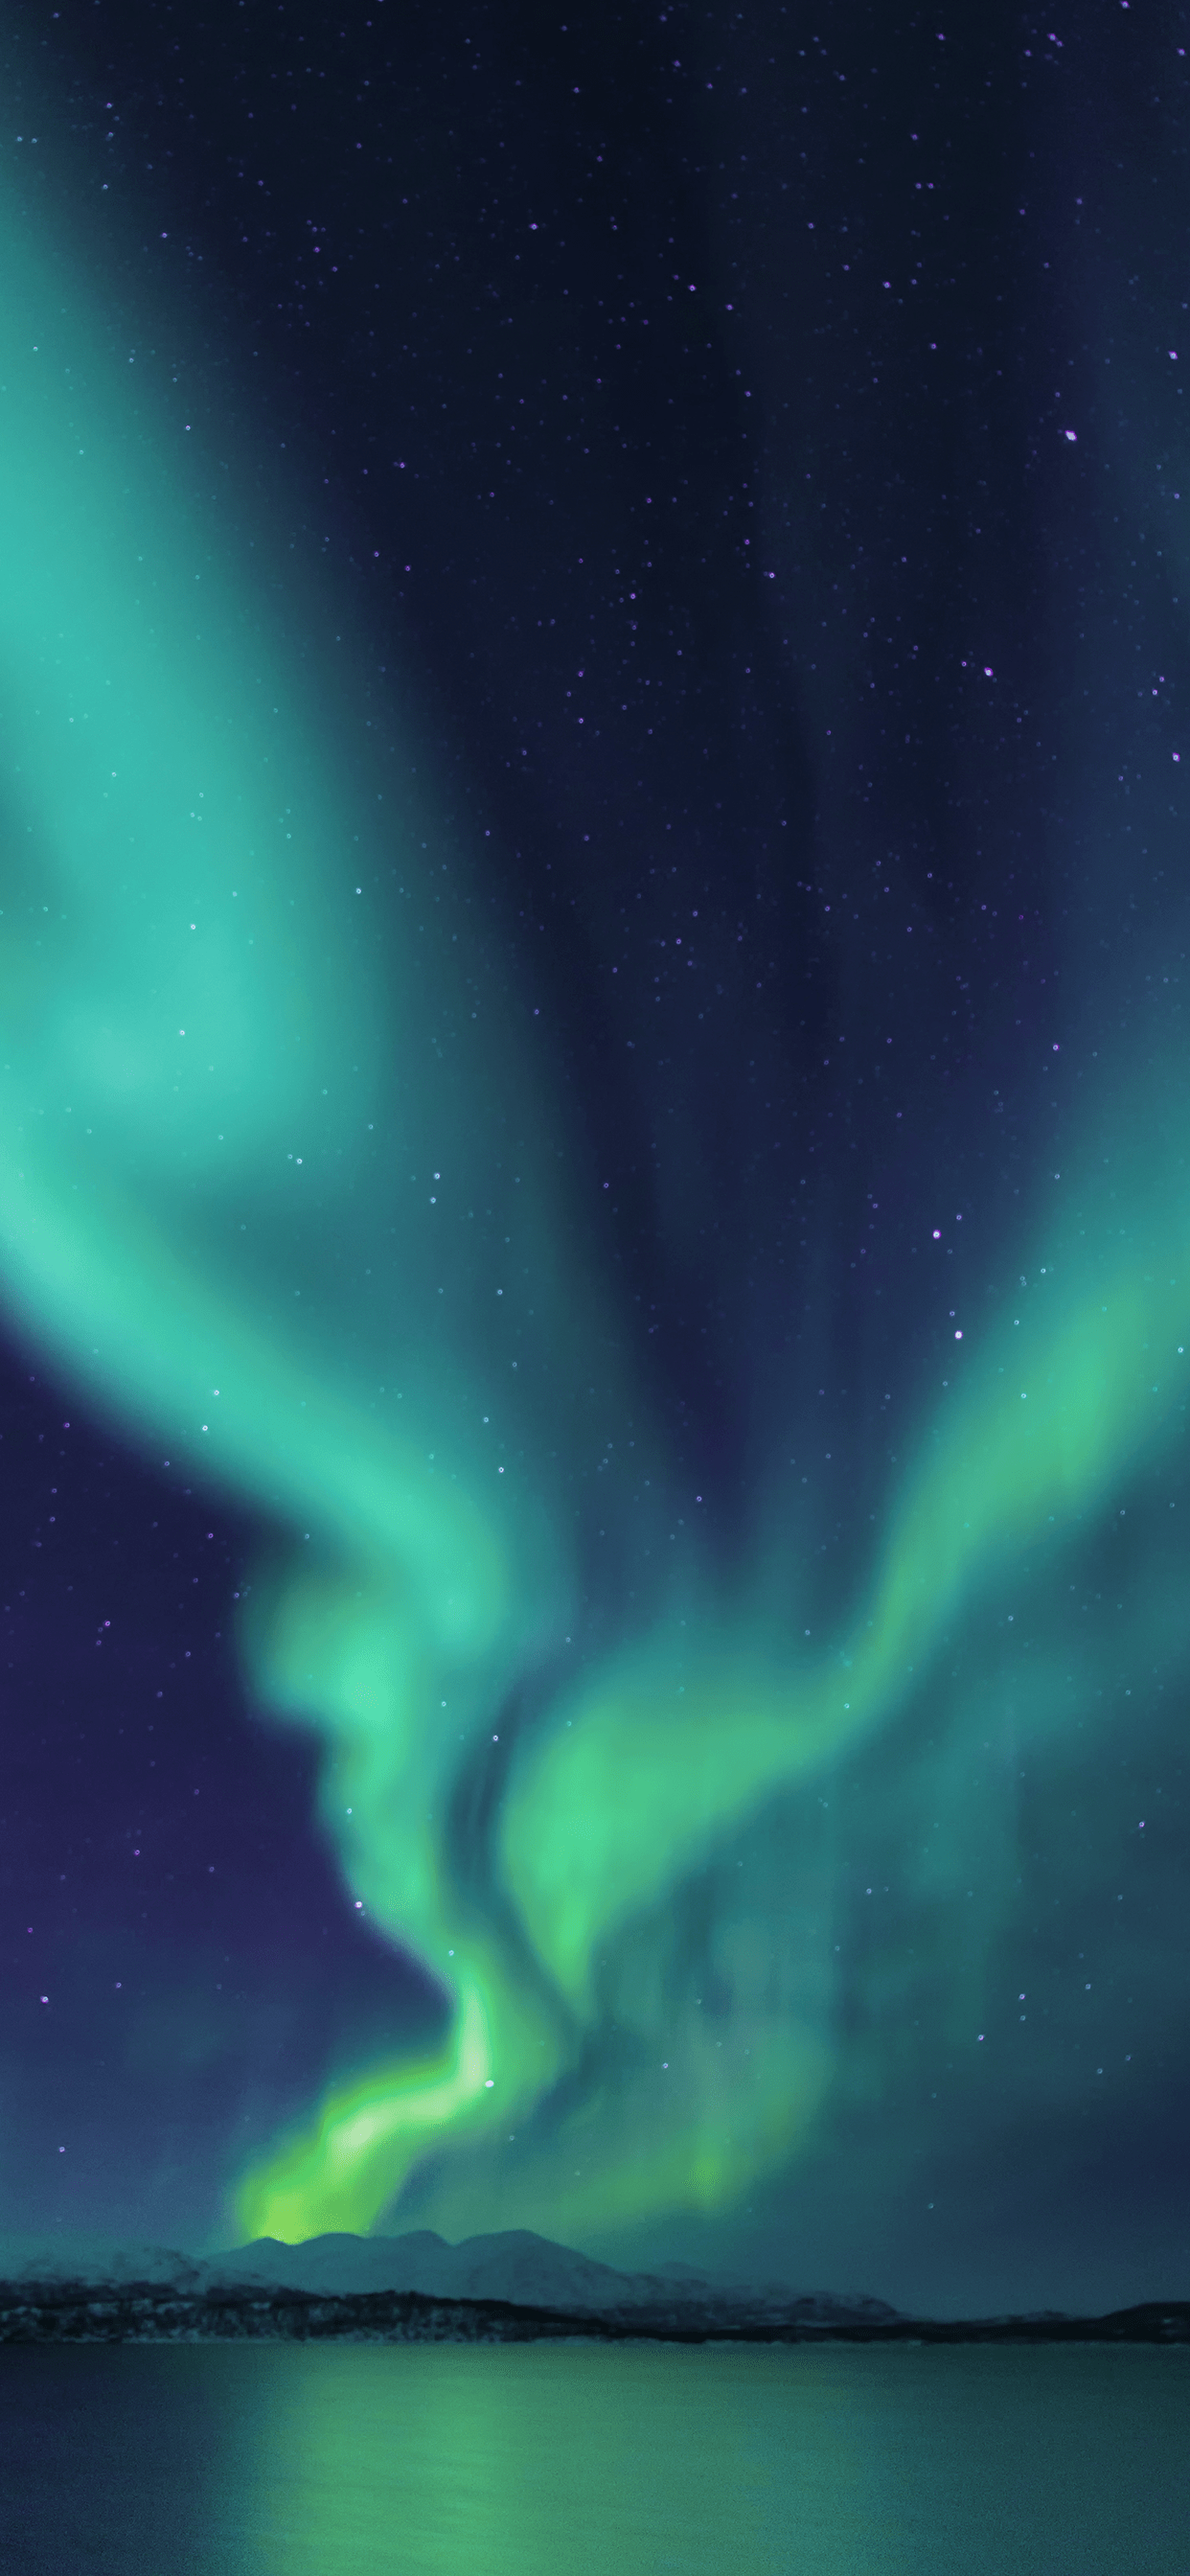 Northern Lights Wallpaper for iPhone Pro Max, X, 6